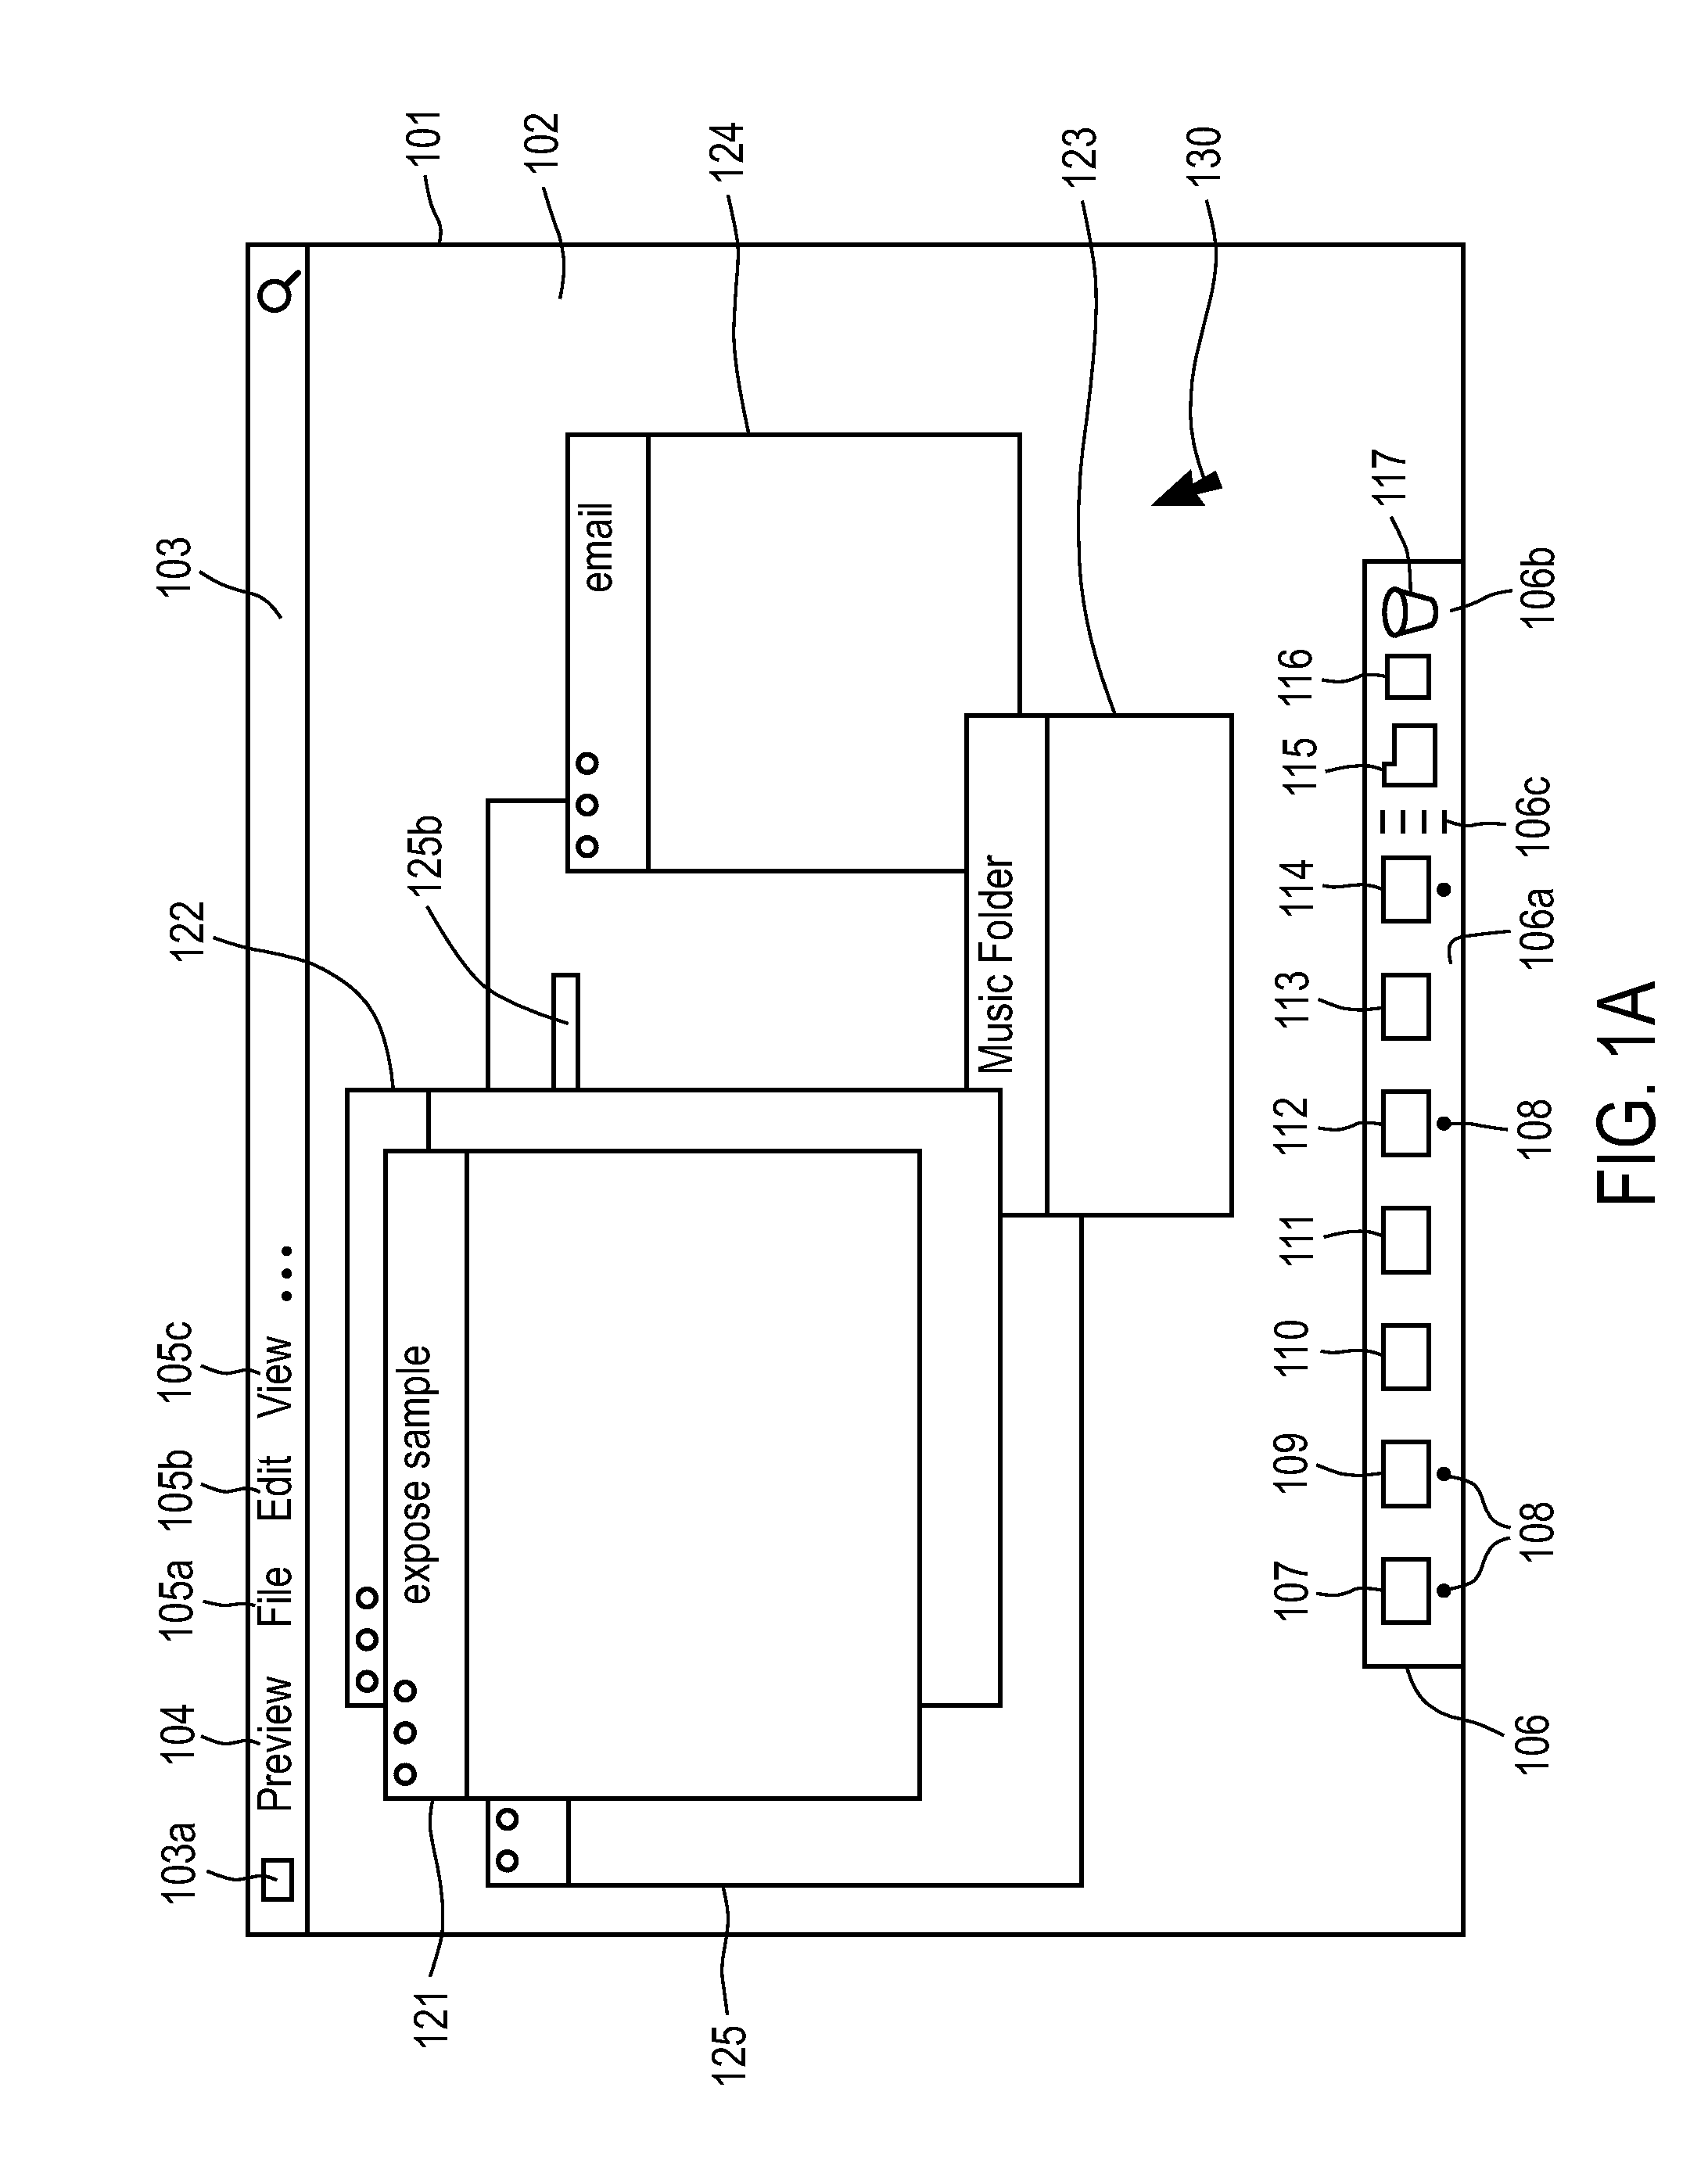 User interface for multiple display regions